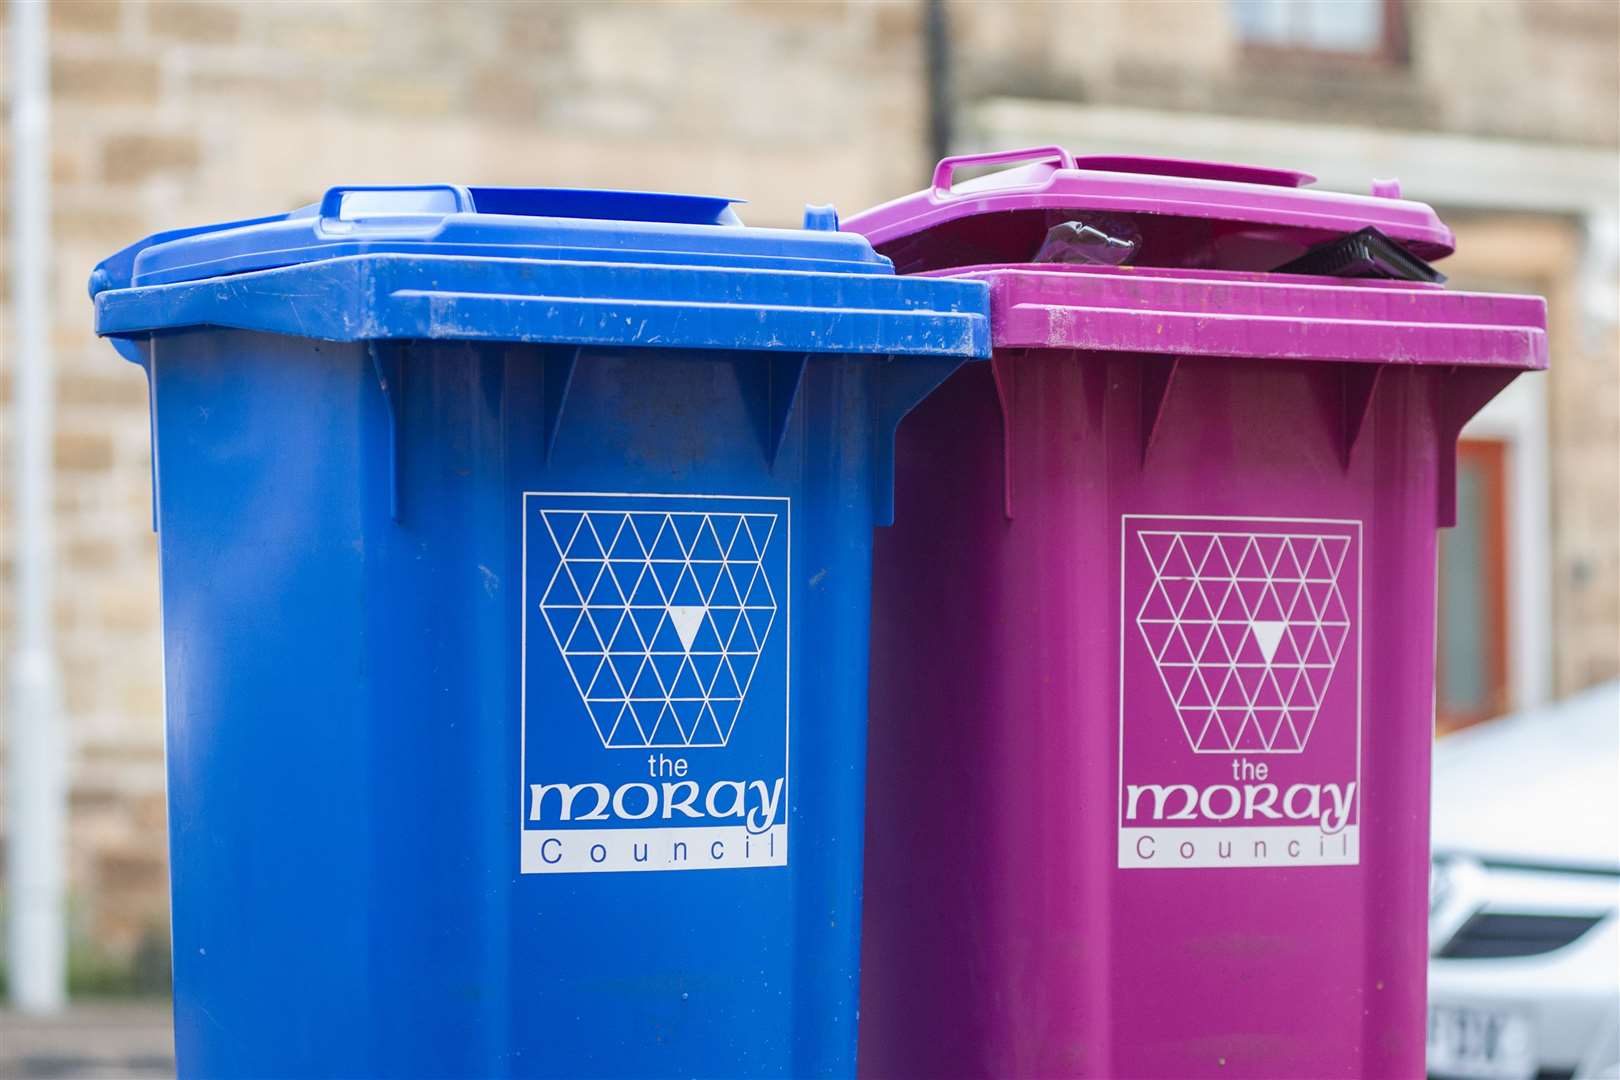 Householders in Moray send more than half of their waste to recycling. Picture: Daniel Forsyth